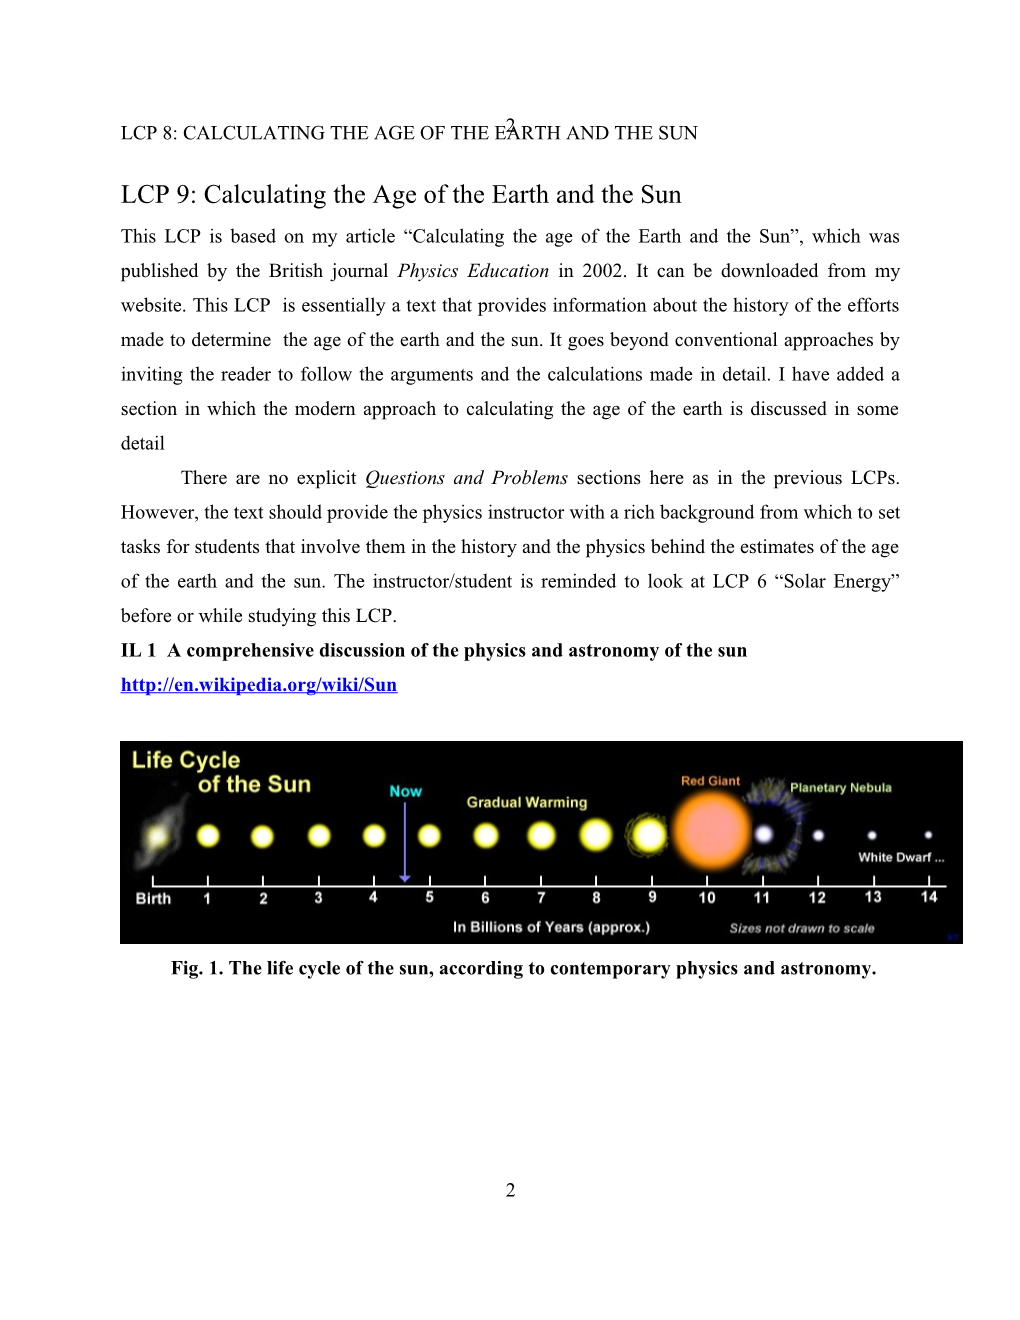 LCP 8: Calculating the Age of the Earth and the Sun